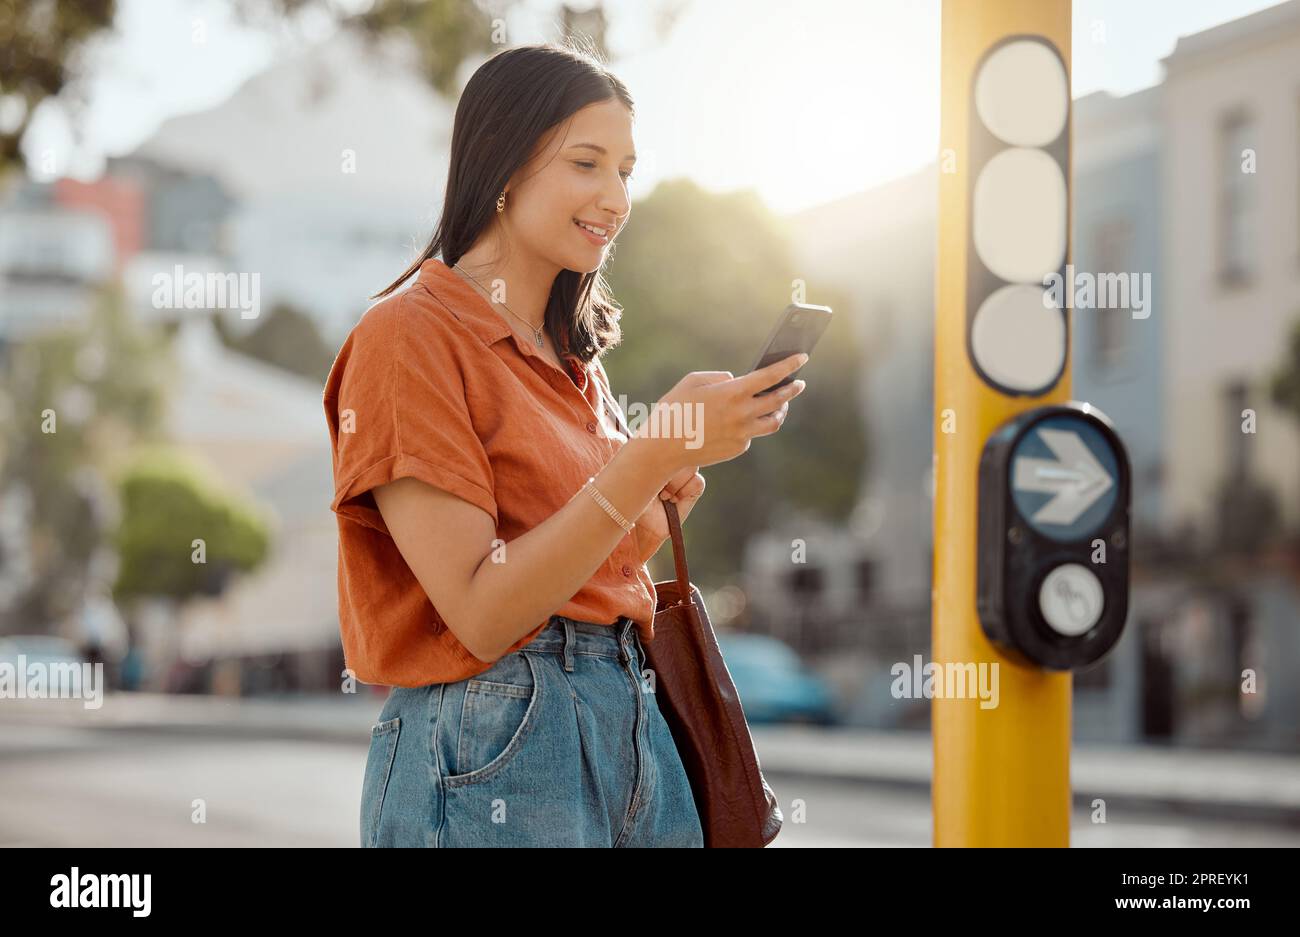 Texting on a phone, browsing social media and waiting for public transport and commuting in the city. Young female tourist enjoying travel and Looking online for places to see and visit on holiday Stock Photo